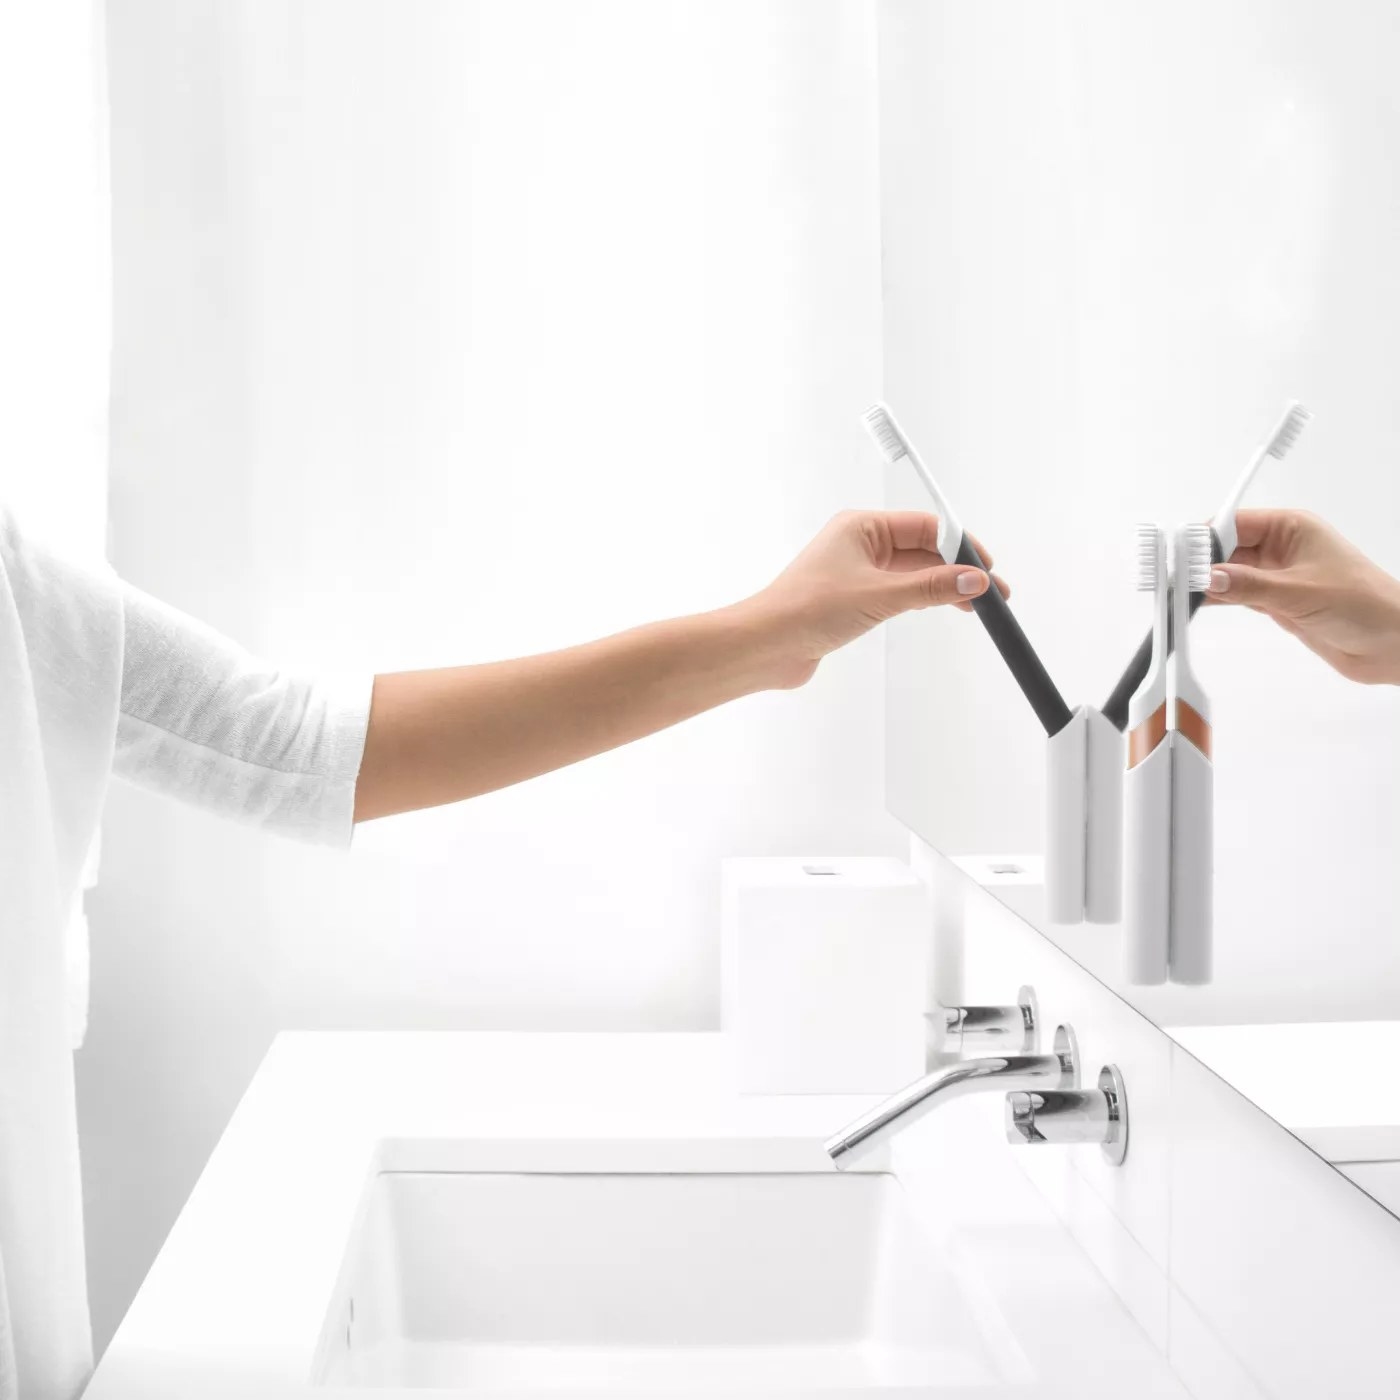 A model putting their toothbrush back in the holder attached to a mirror